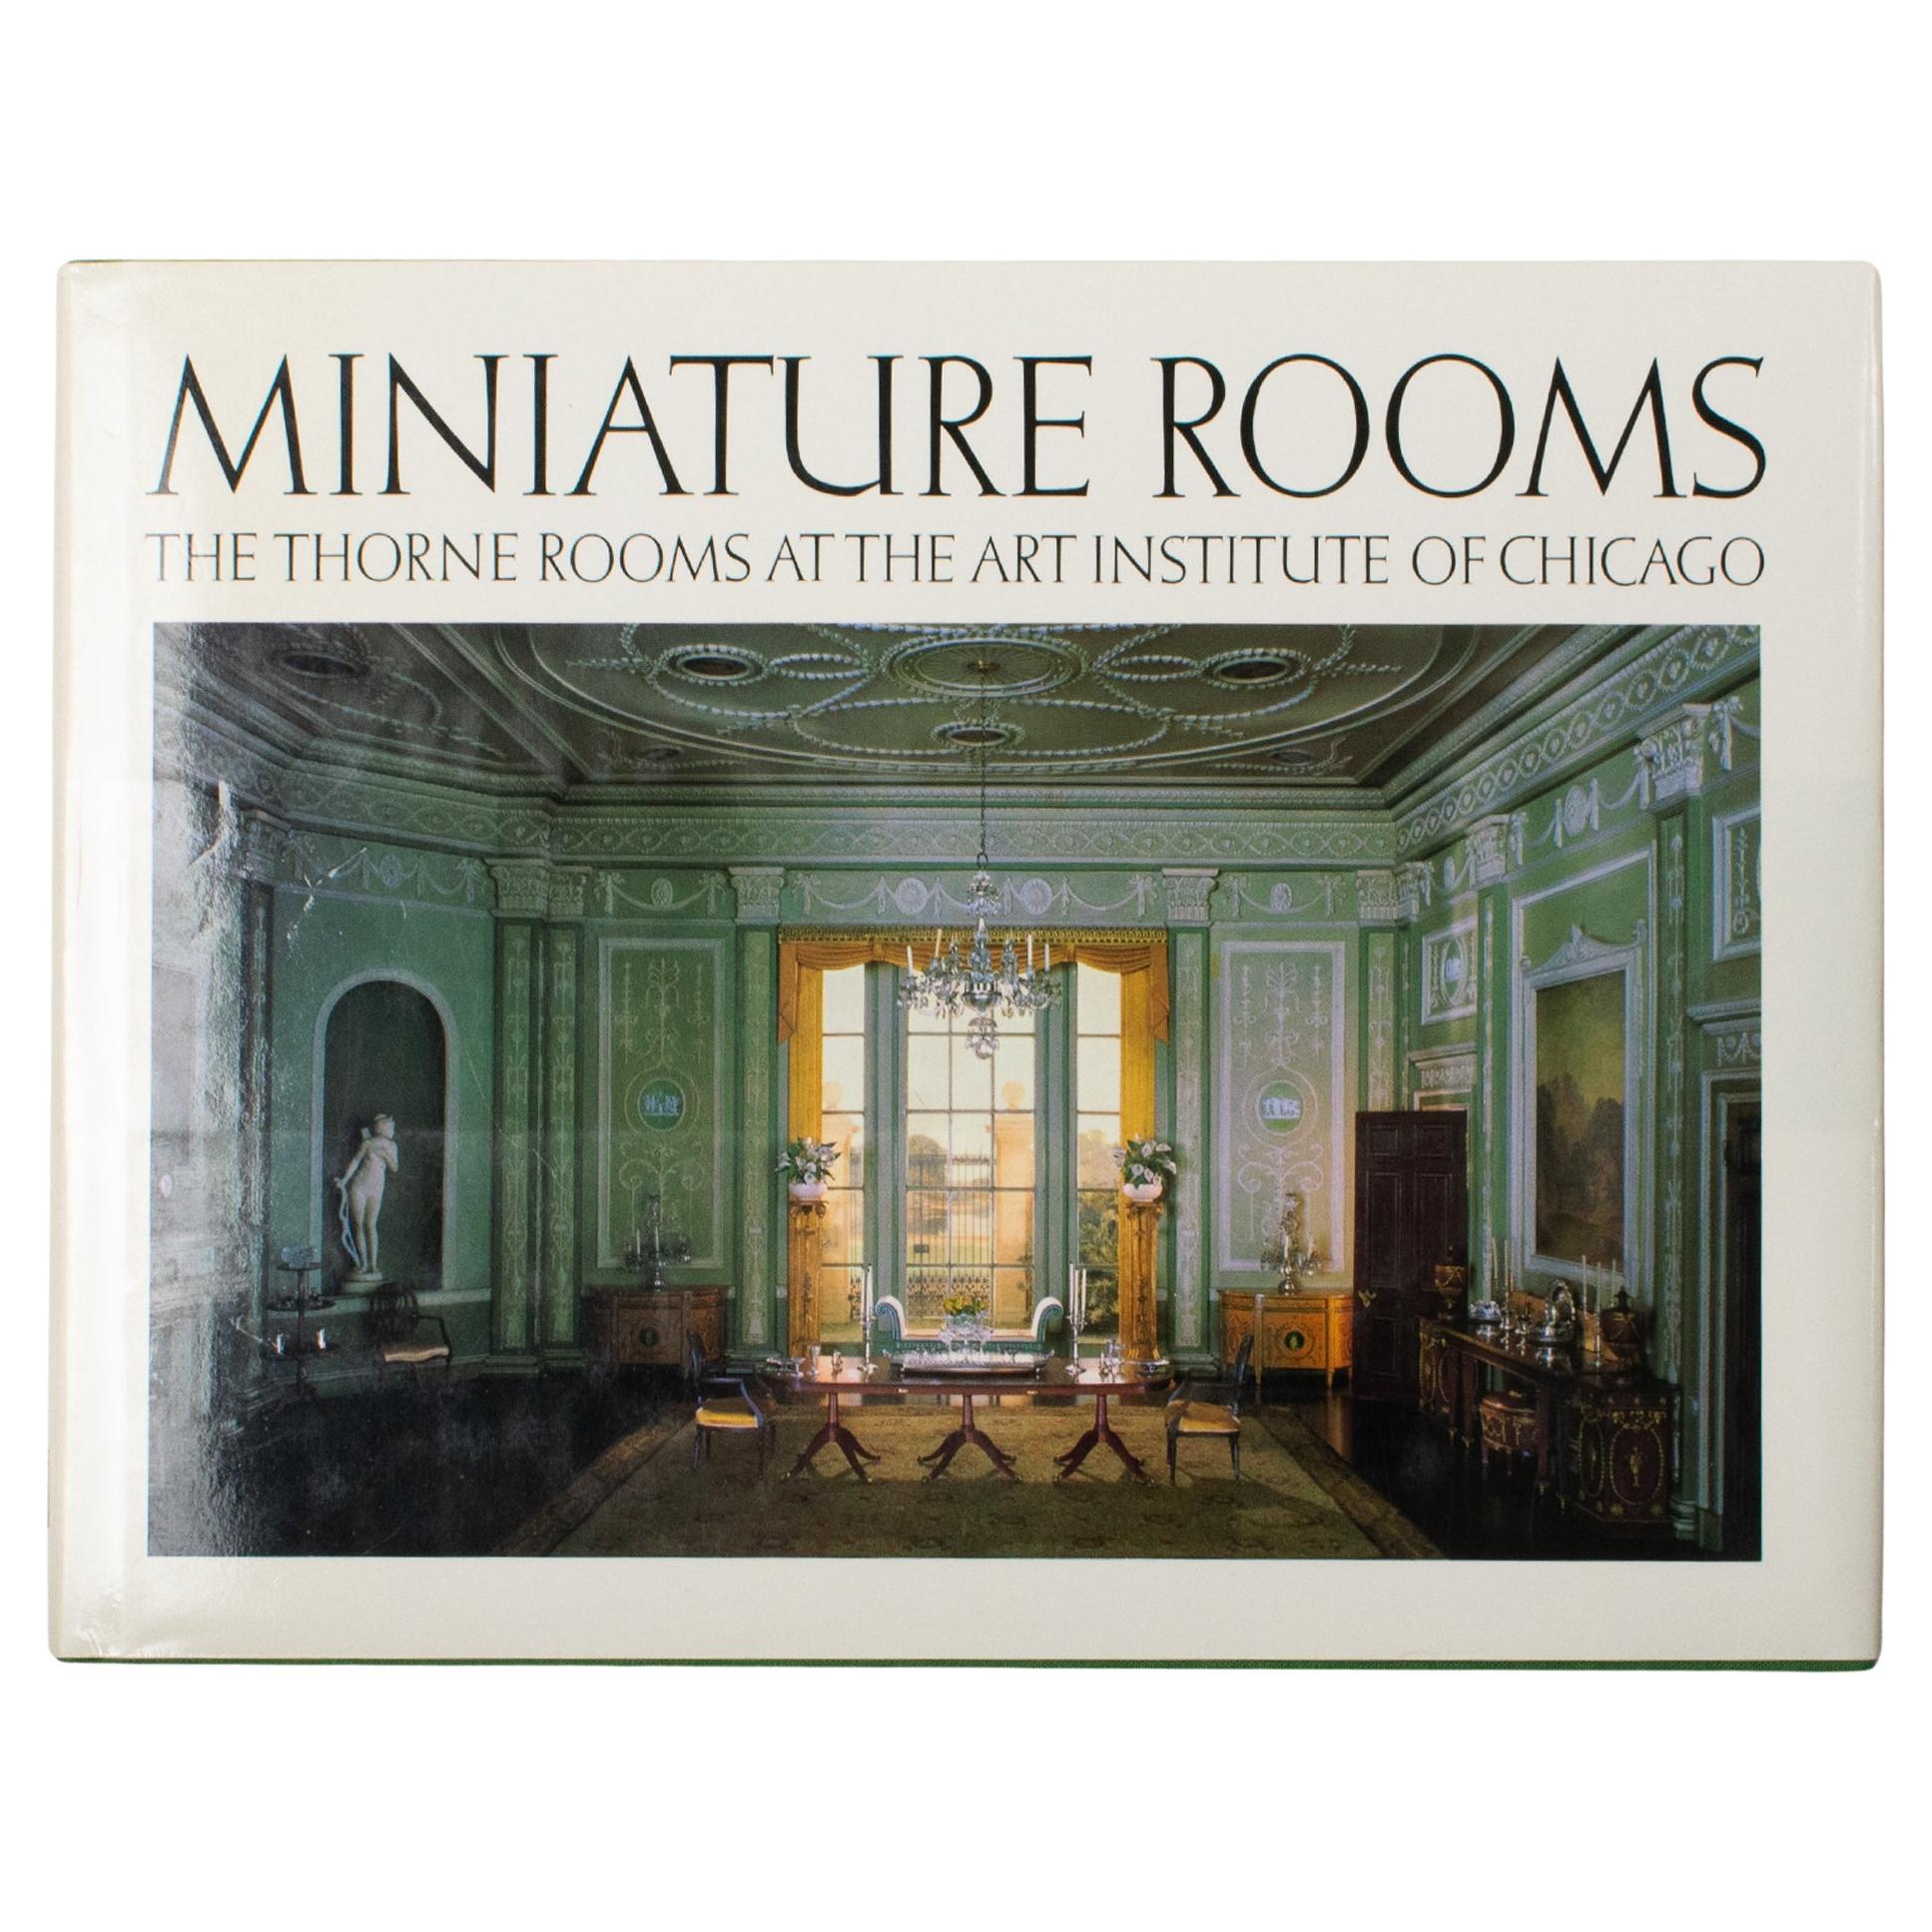 Miniature Rooms Book, The Thorne Rooms at the Art Institute of Chicago, 1983 im Angebot